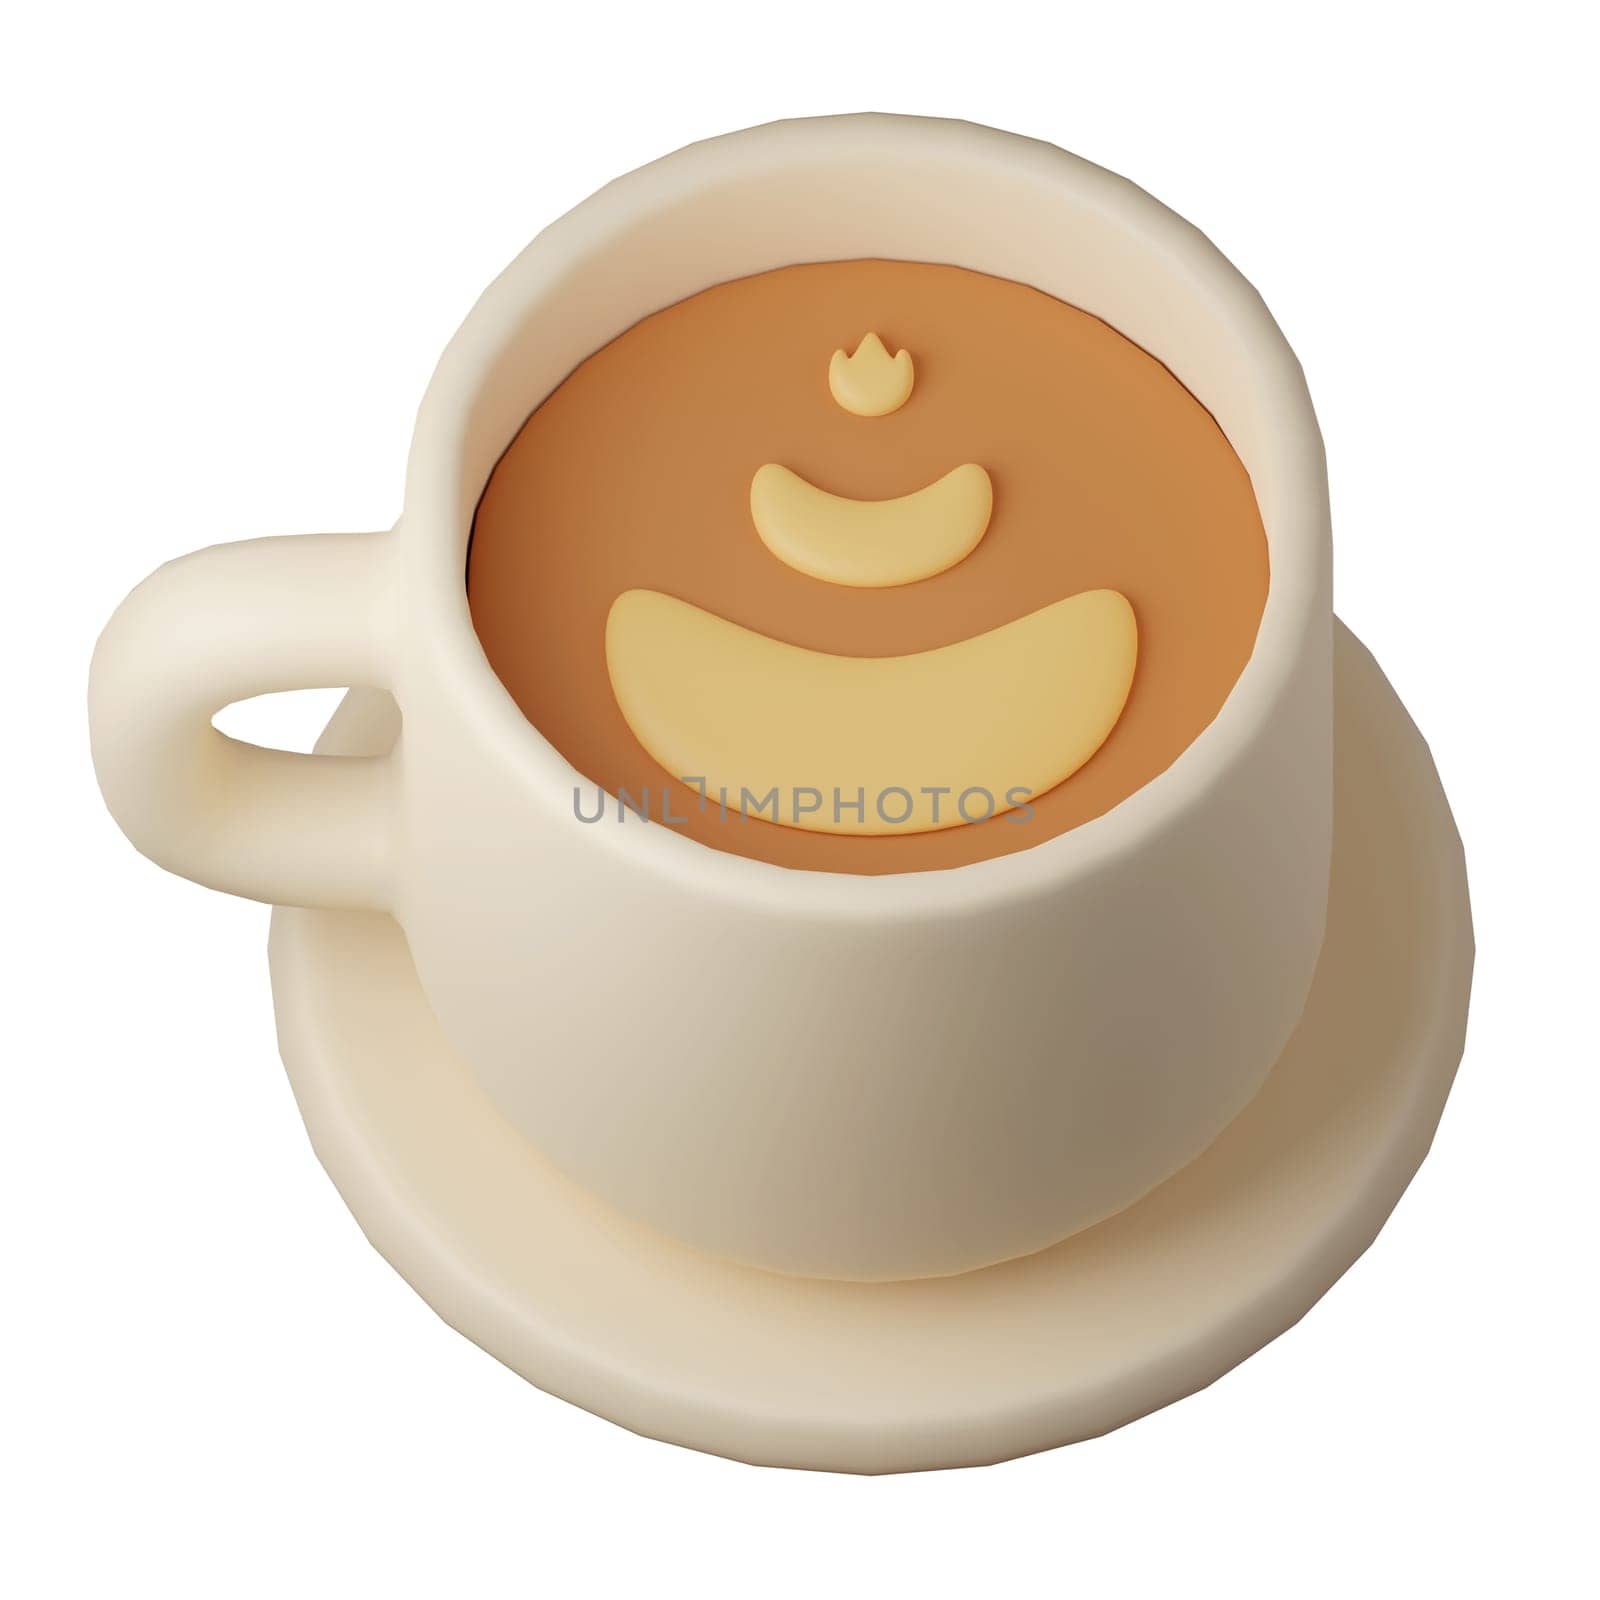 a cup of cappuccino coffee .latte. espresso Cartoon Style Isolated on a White Background. 3d illustration by meepiangraphic